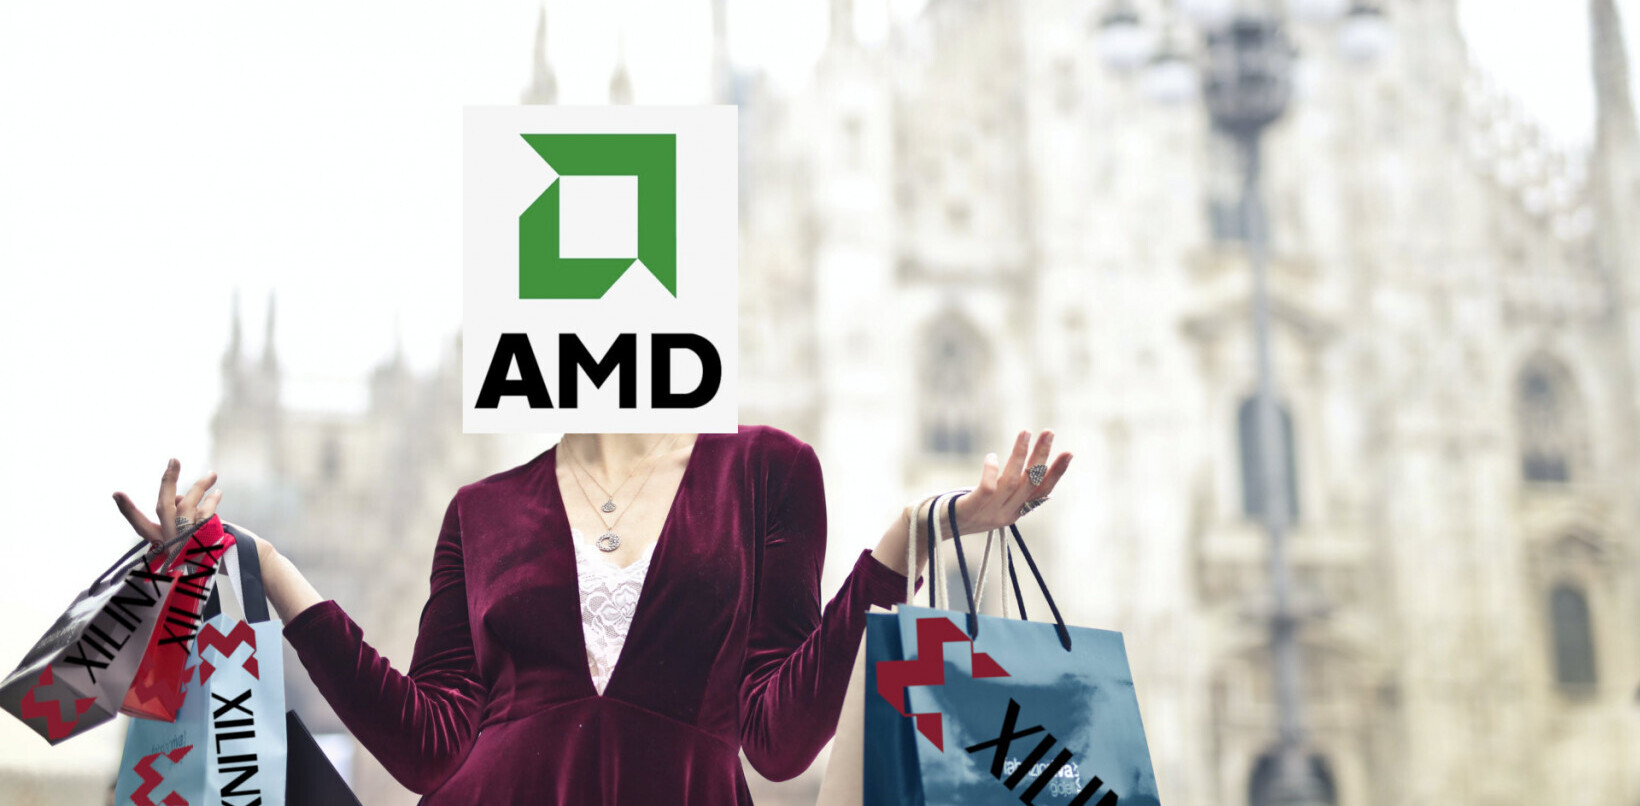 Xilinx stock pumps 17% on reports that AMD will buy it for $30B